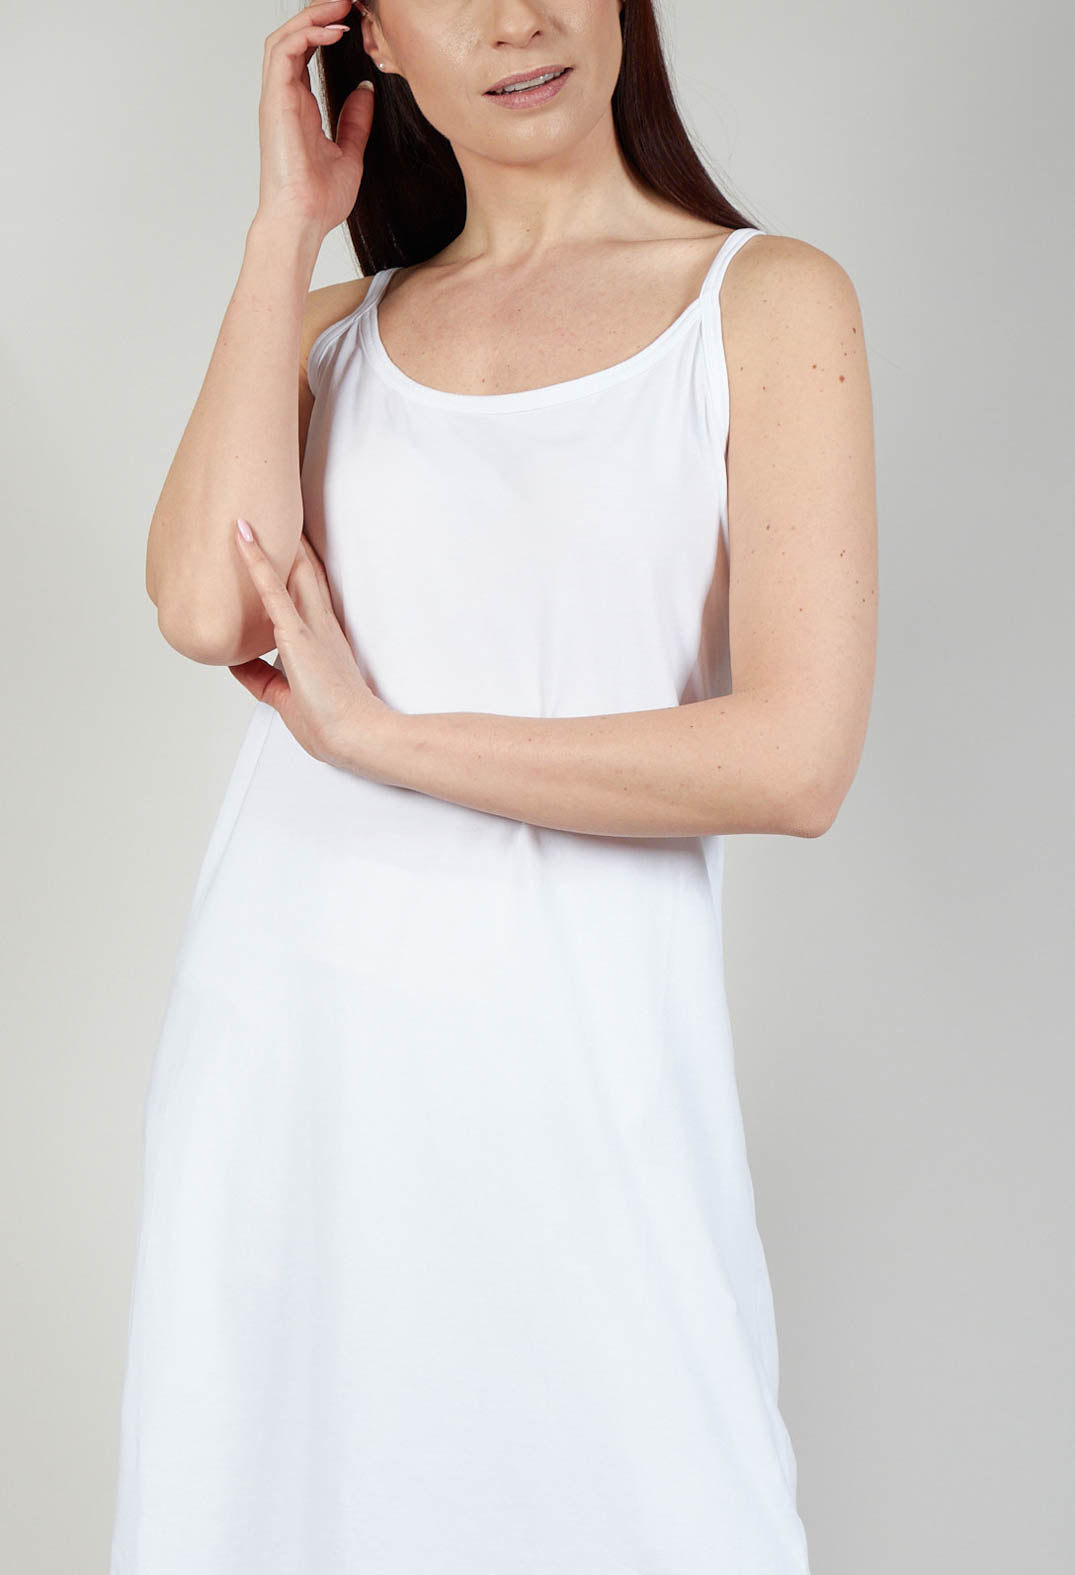 Cami Jersey Dress in White